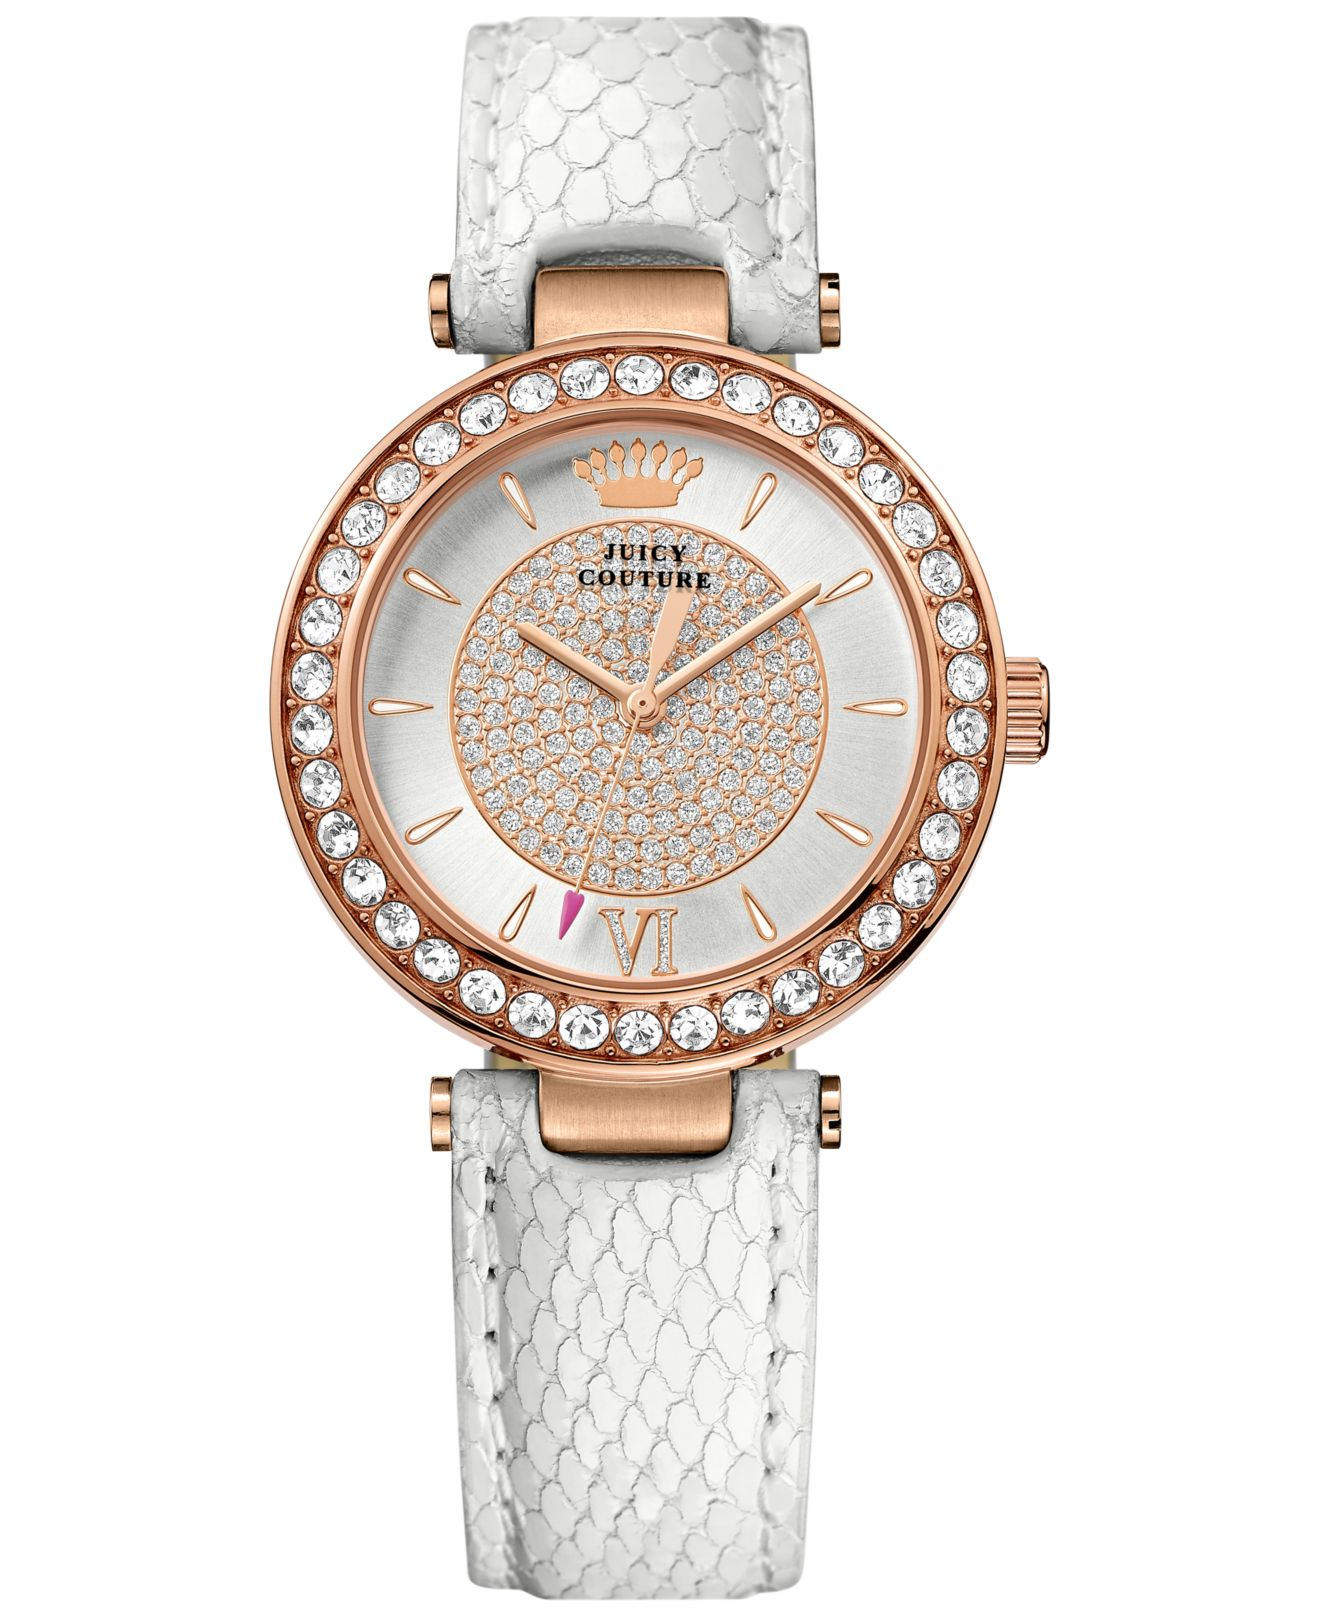 Juicy couture Women'S Luxe Couture White Embossed Leather Strap Watch ...